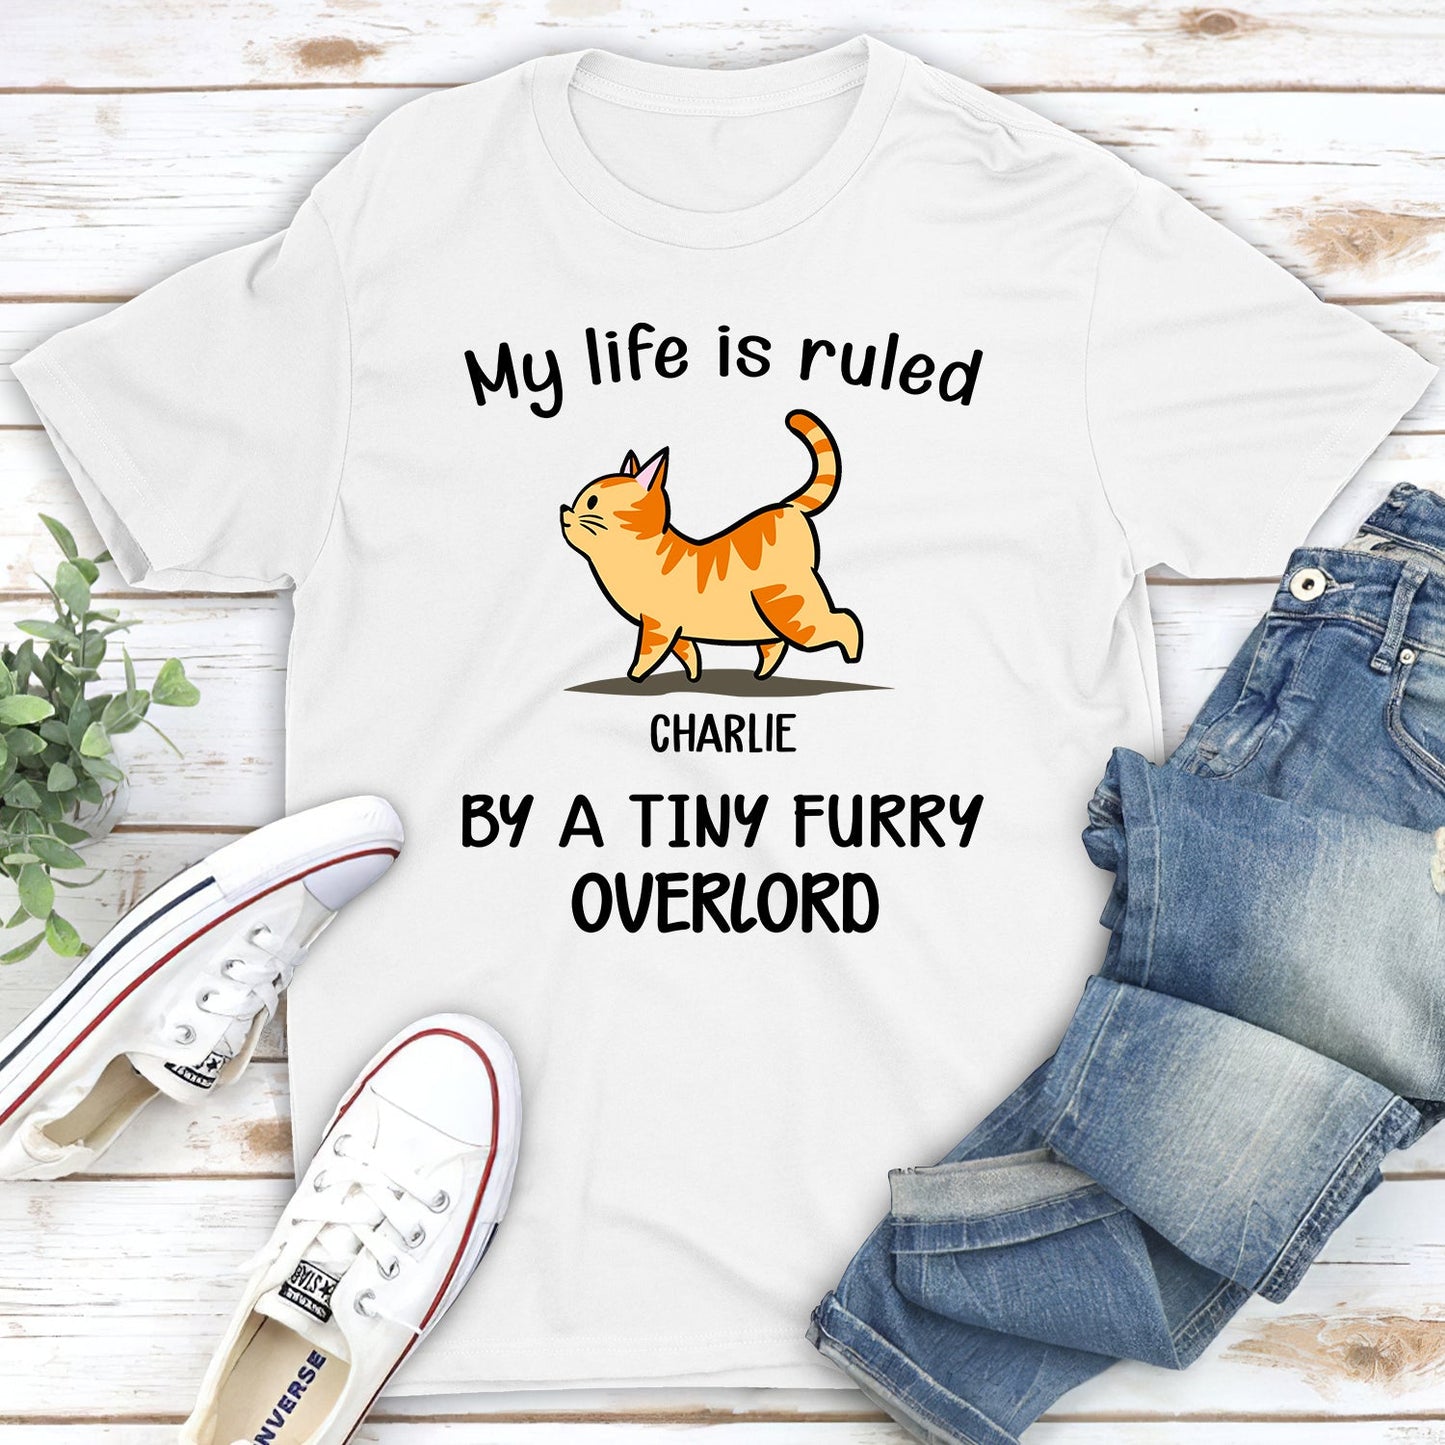 My Life Is Ruled By Cats - Personalized Custom Unisex T-shirt